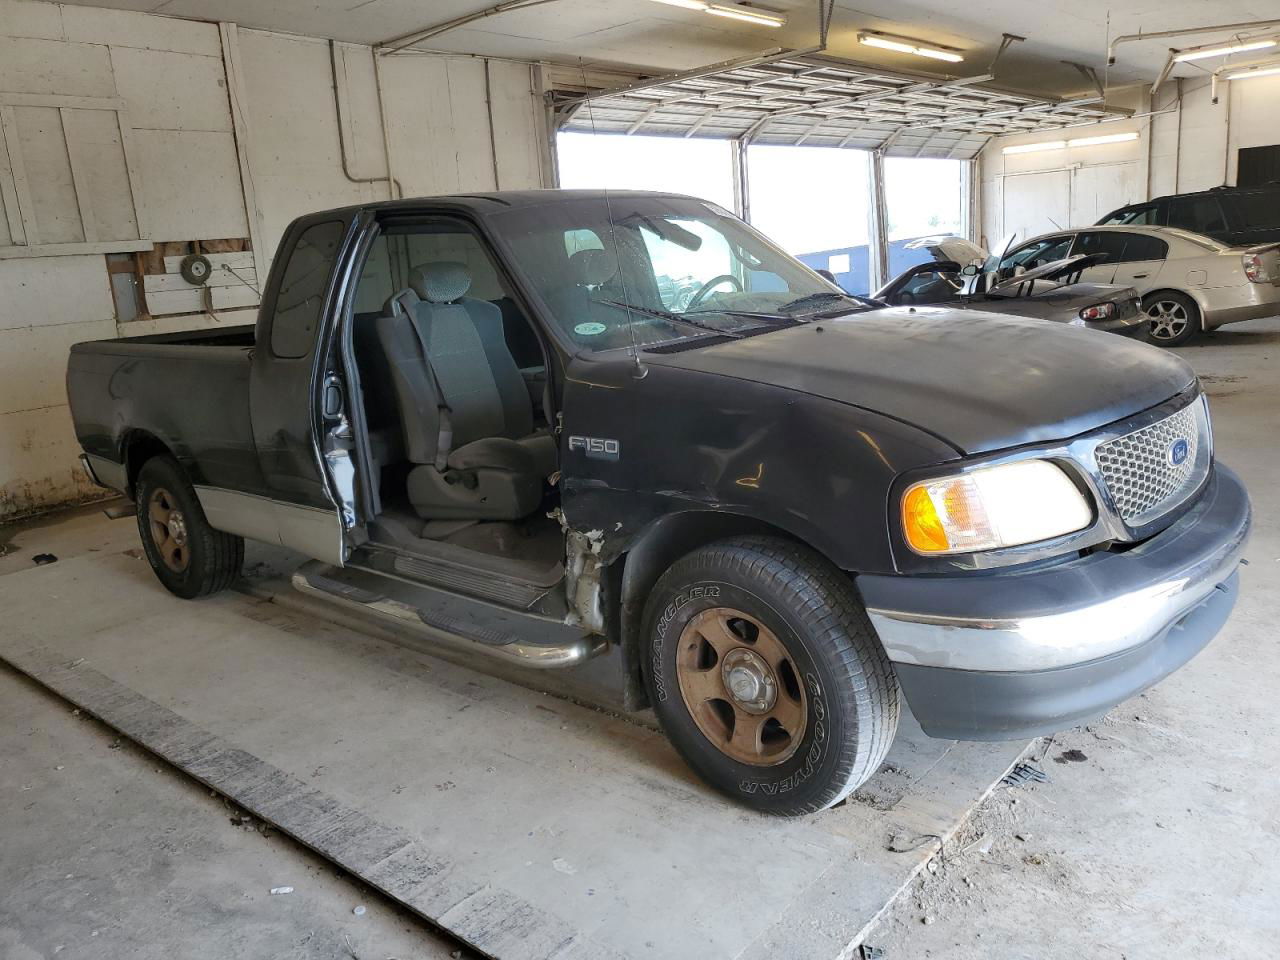 2001 Ford F150  Black vin: 1FTZX17281NB20360